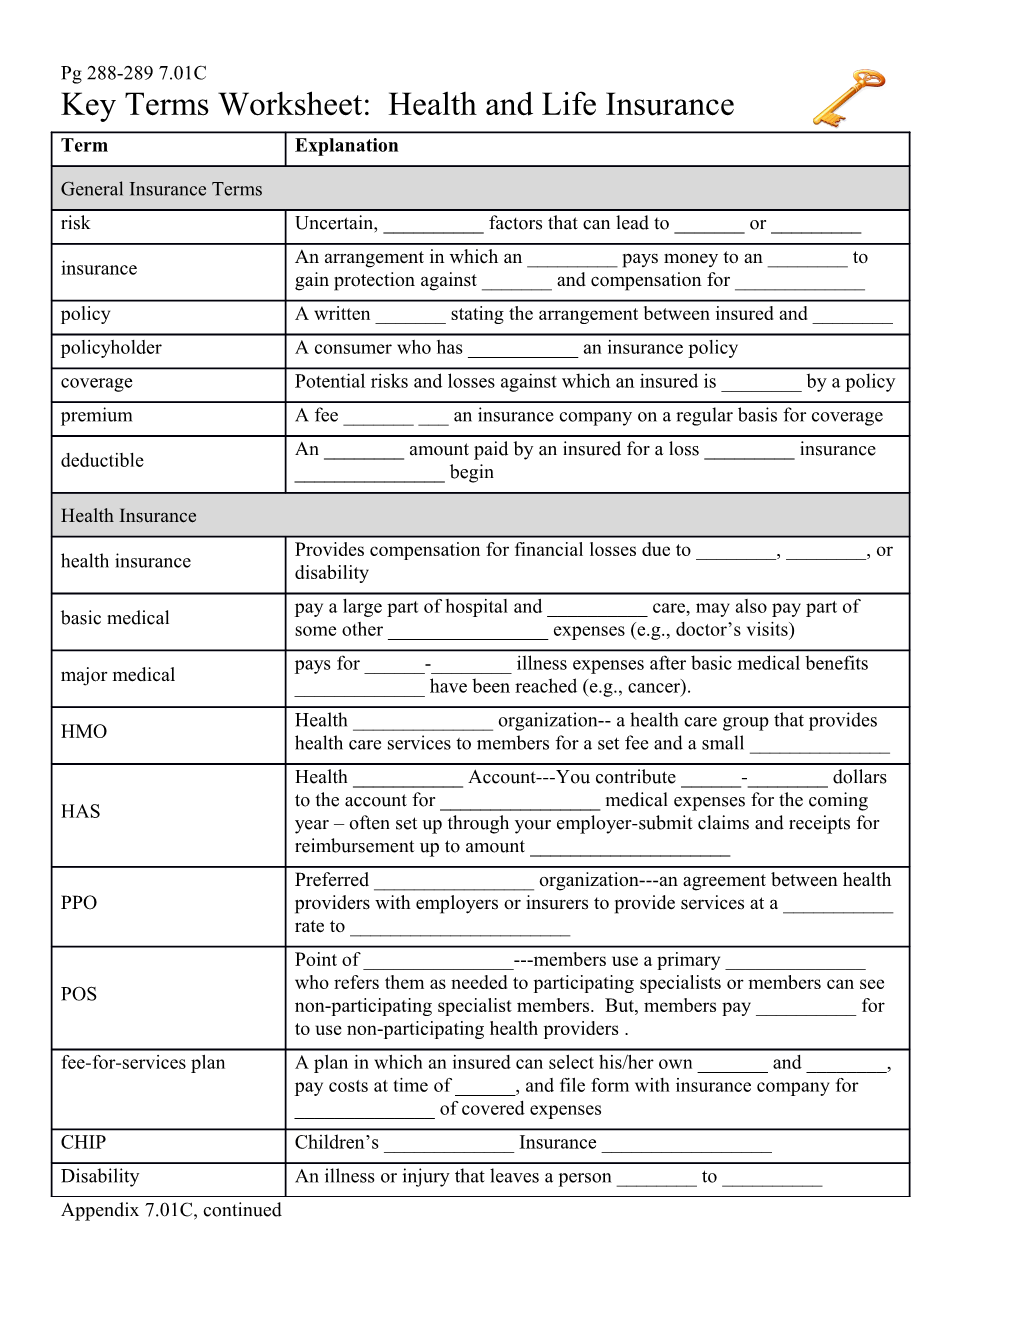 Key Terms Worksheet: Health and Life Insurance